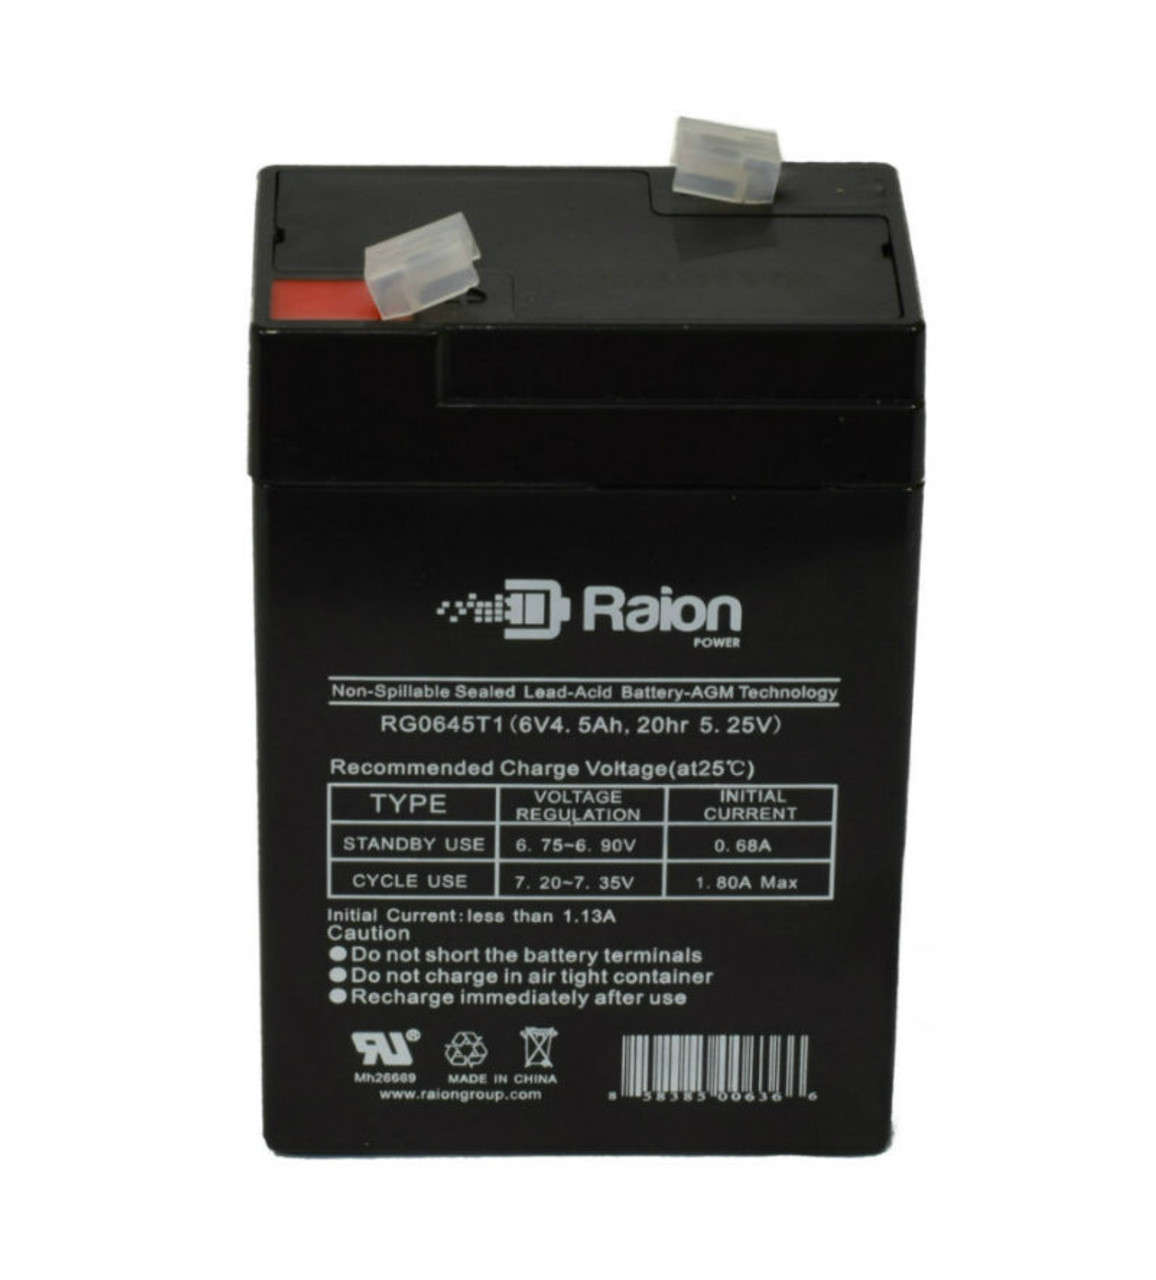 Raion Power RG0645T1 Replacement Battery Cartridge for Ohio Medical Product 504US Pulse Oximeter